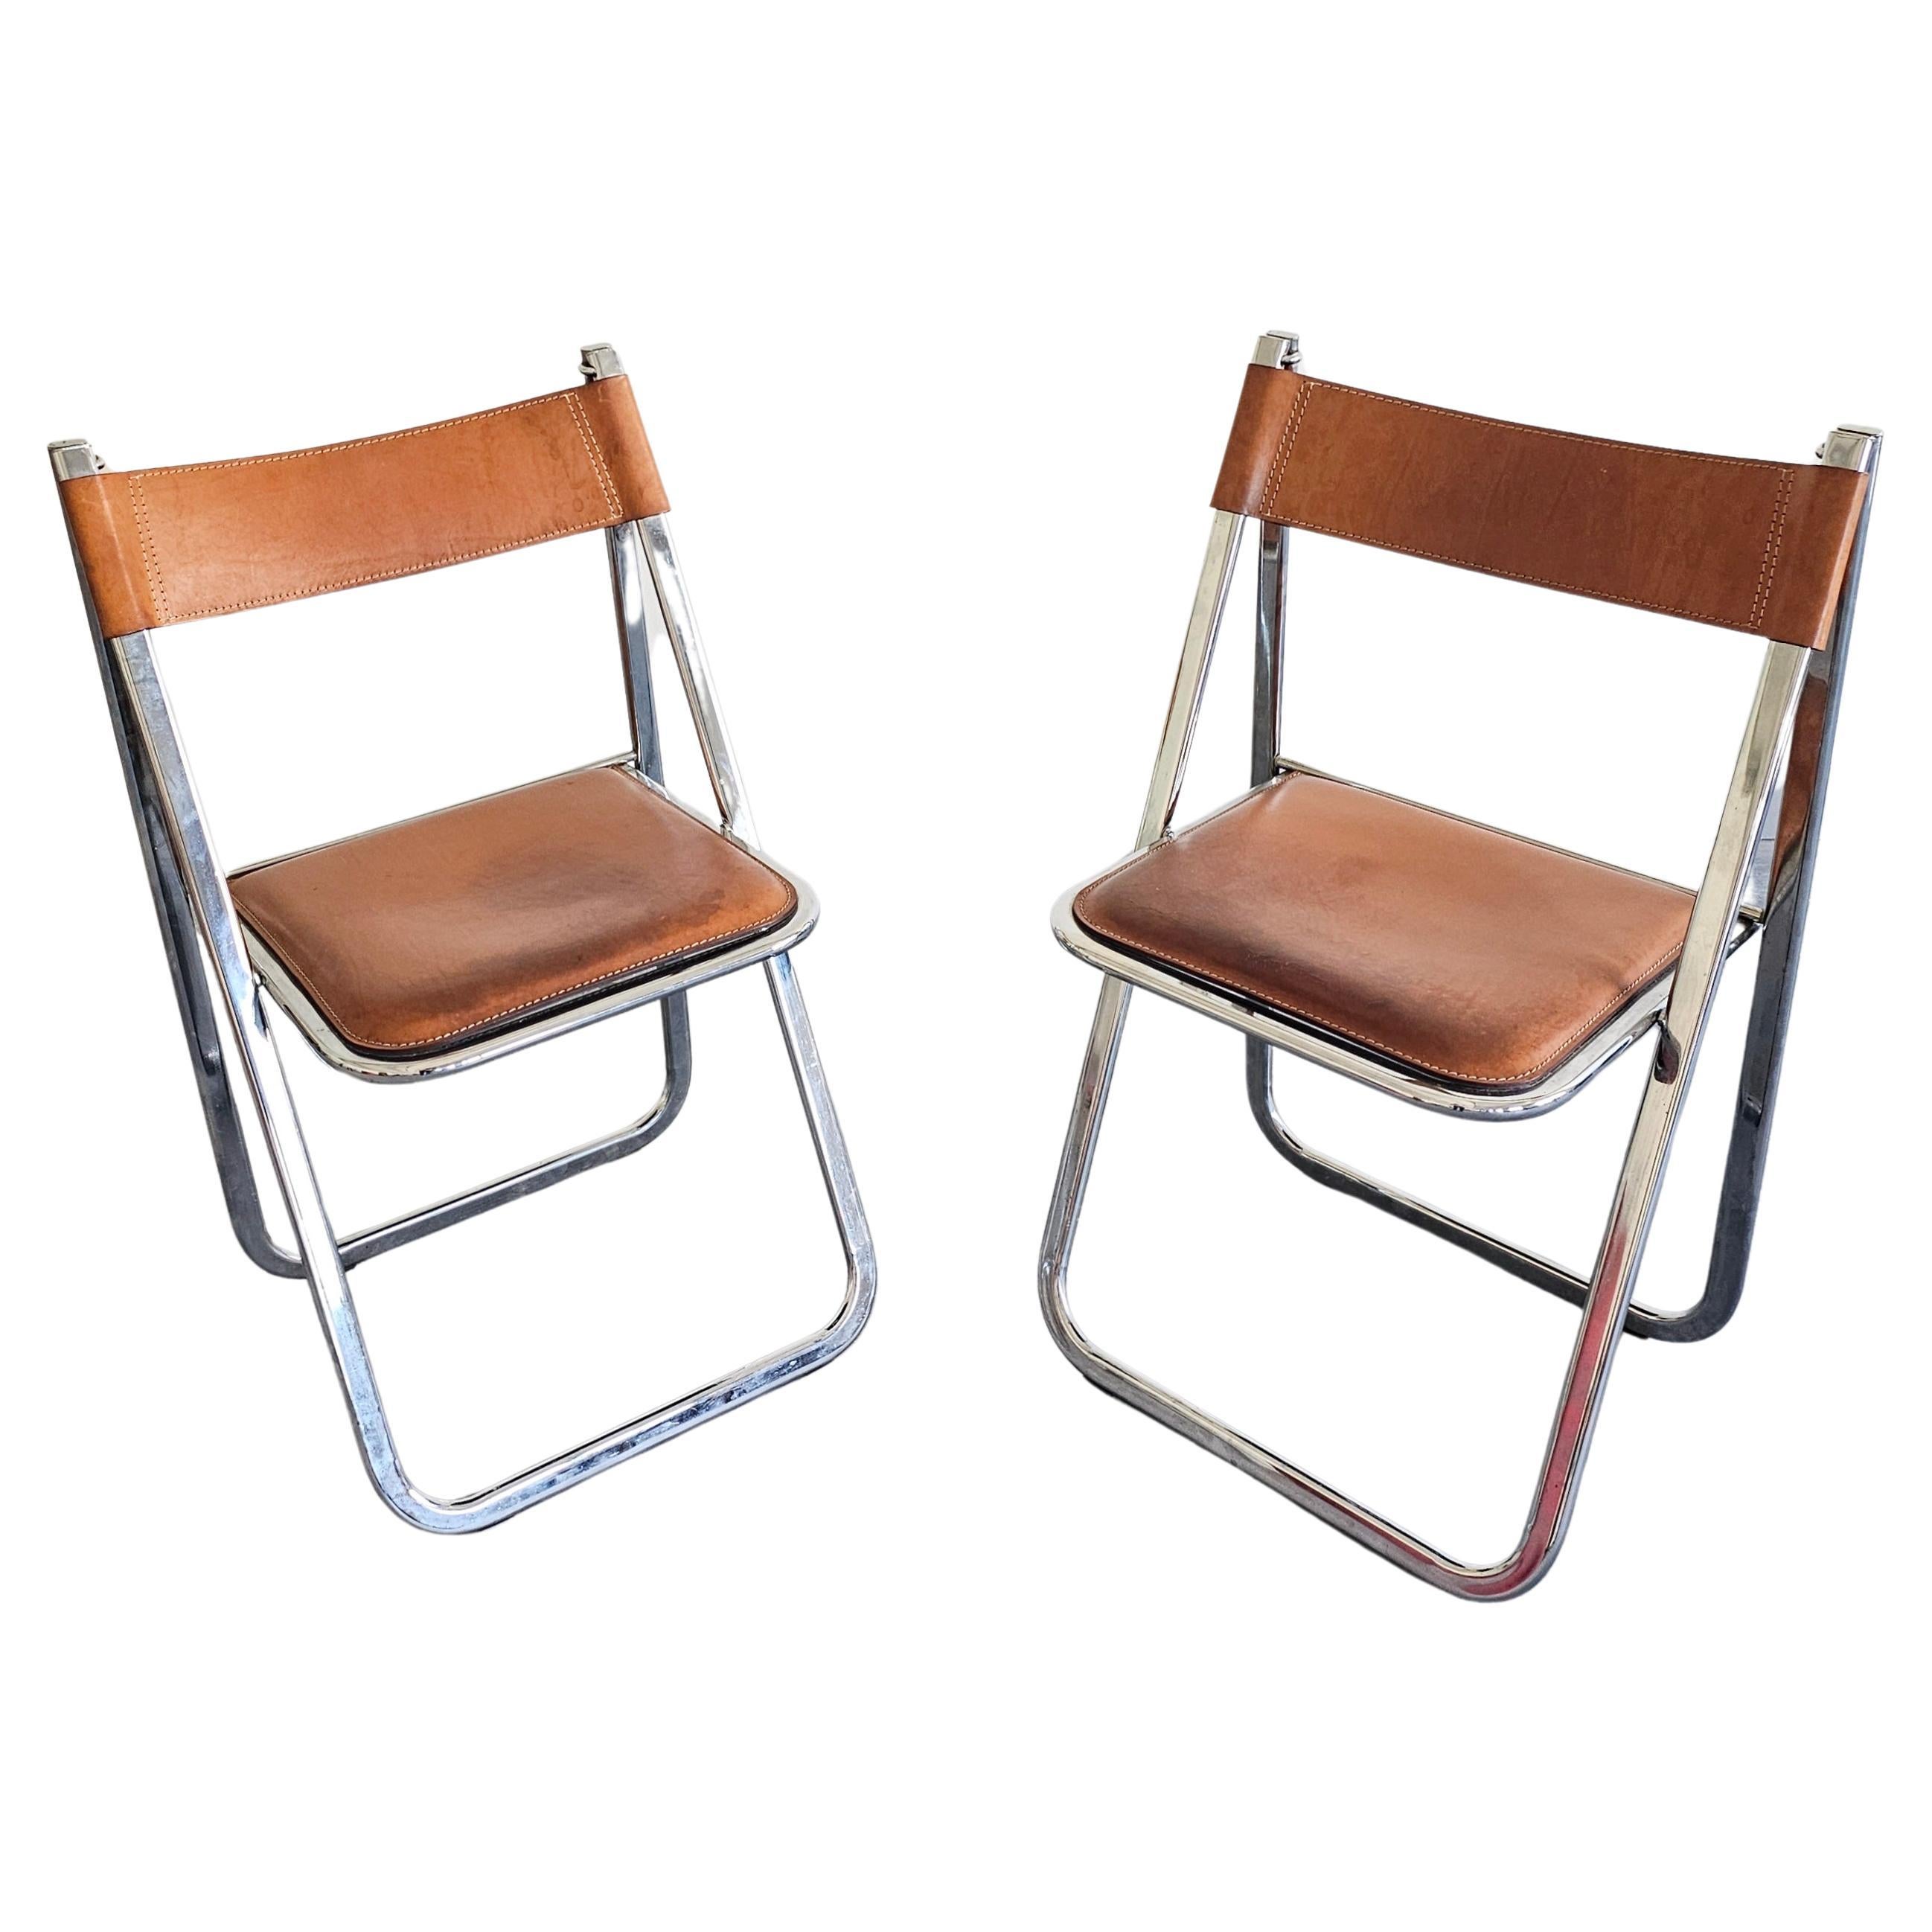 Pair of Folding Chairs by Arrben, model Tamara, in cognac leather, Italy 1970s For Sale